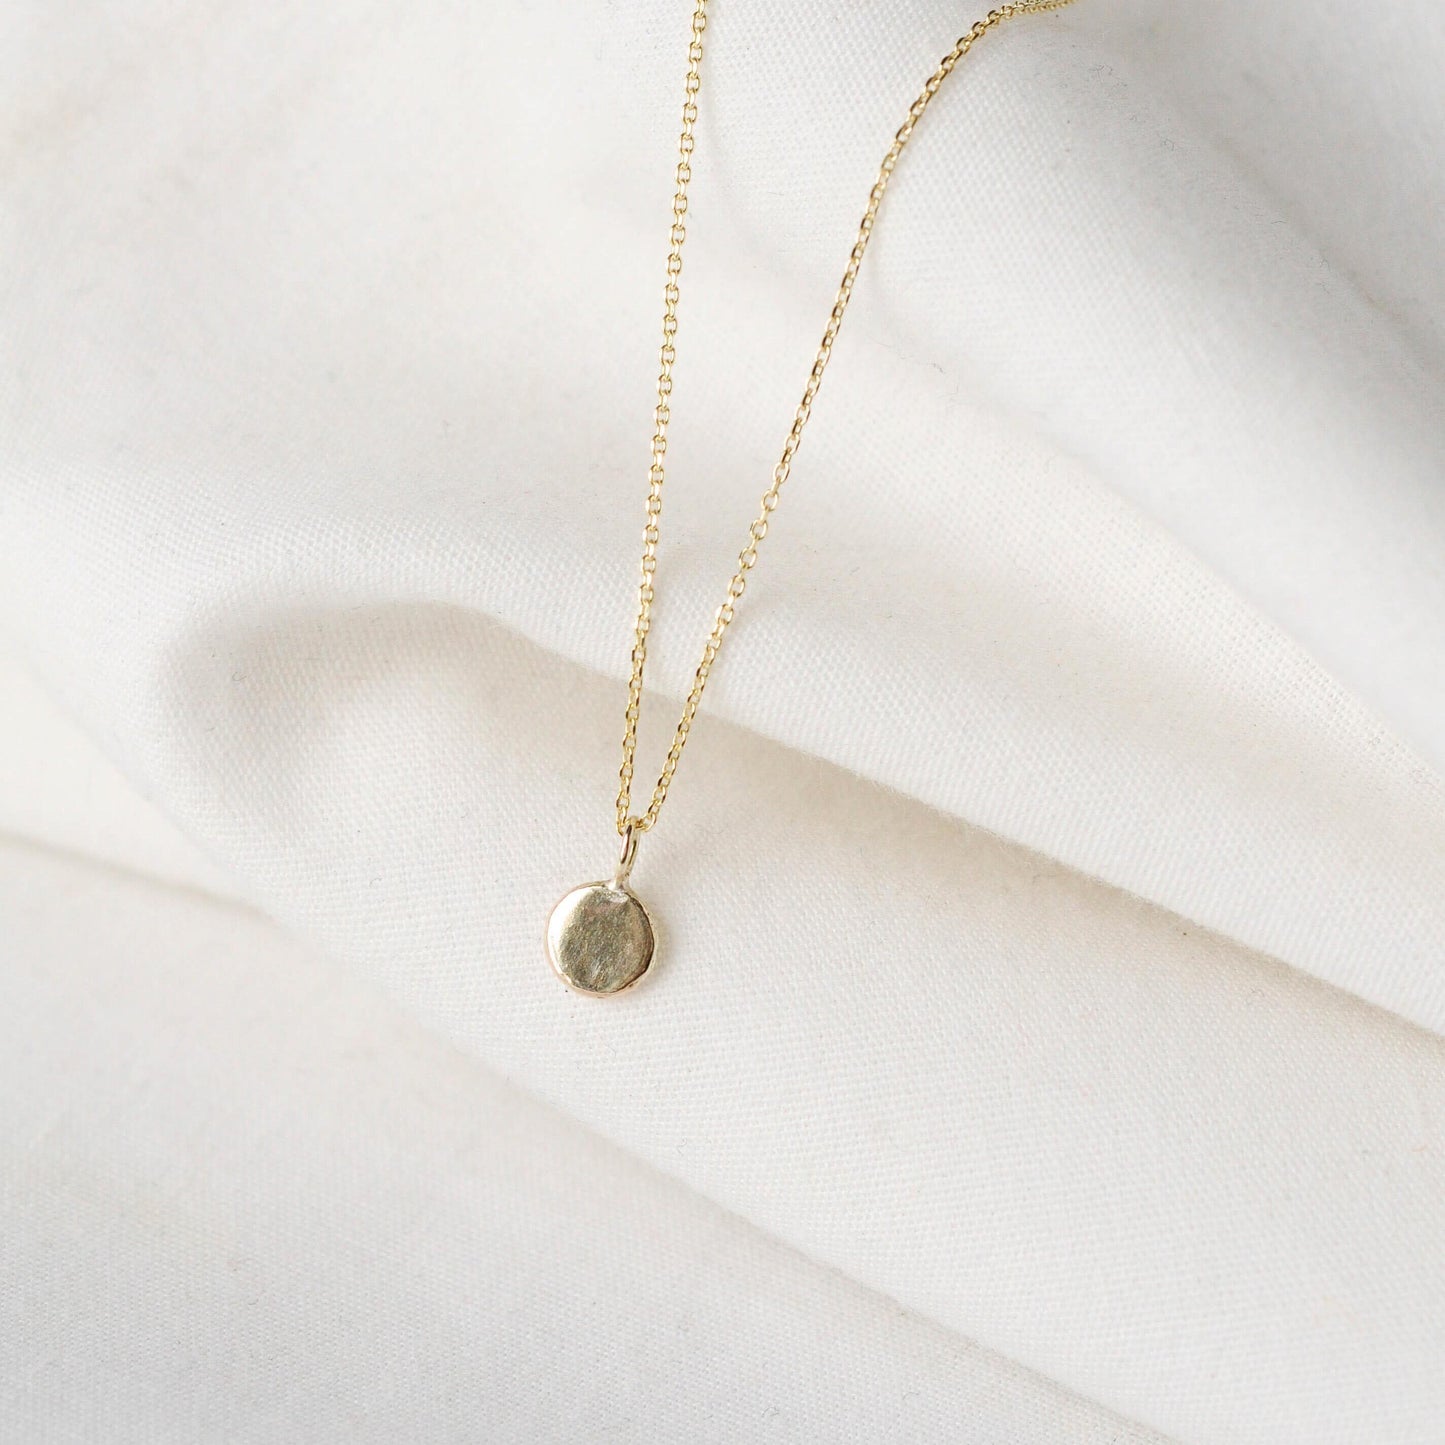 9ct Gold Necklace with Round Pendant - Drumgreenagh Gift Shop